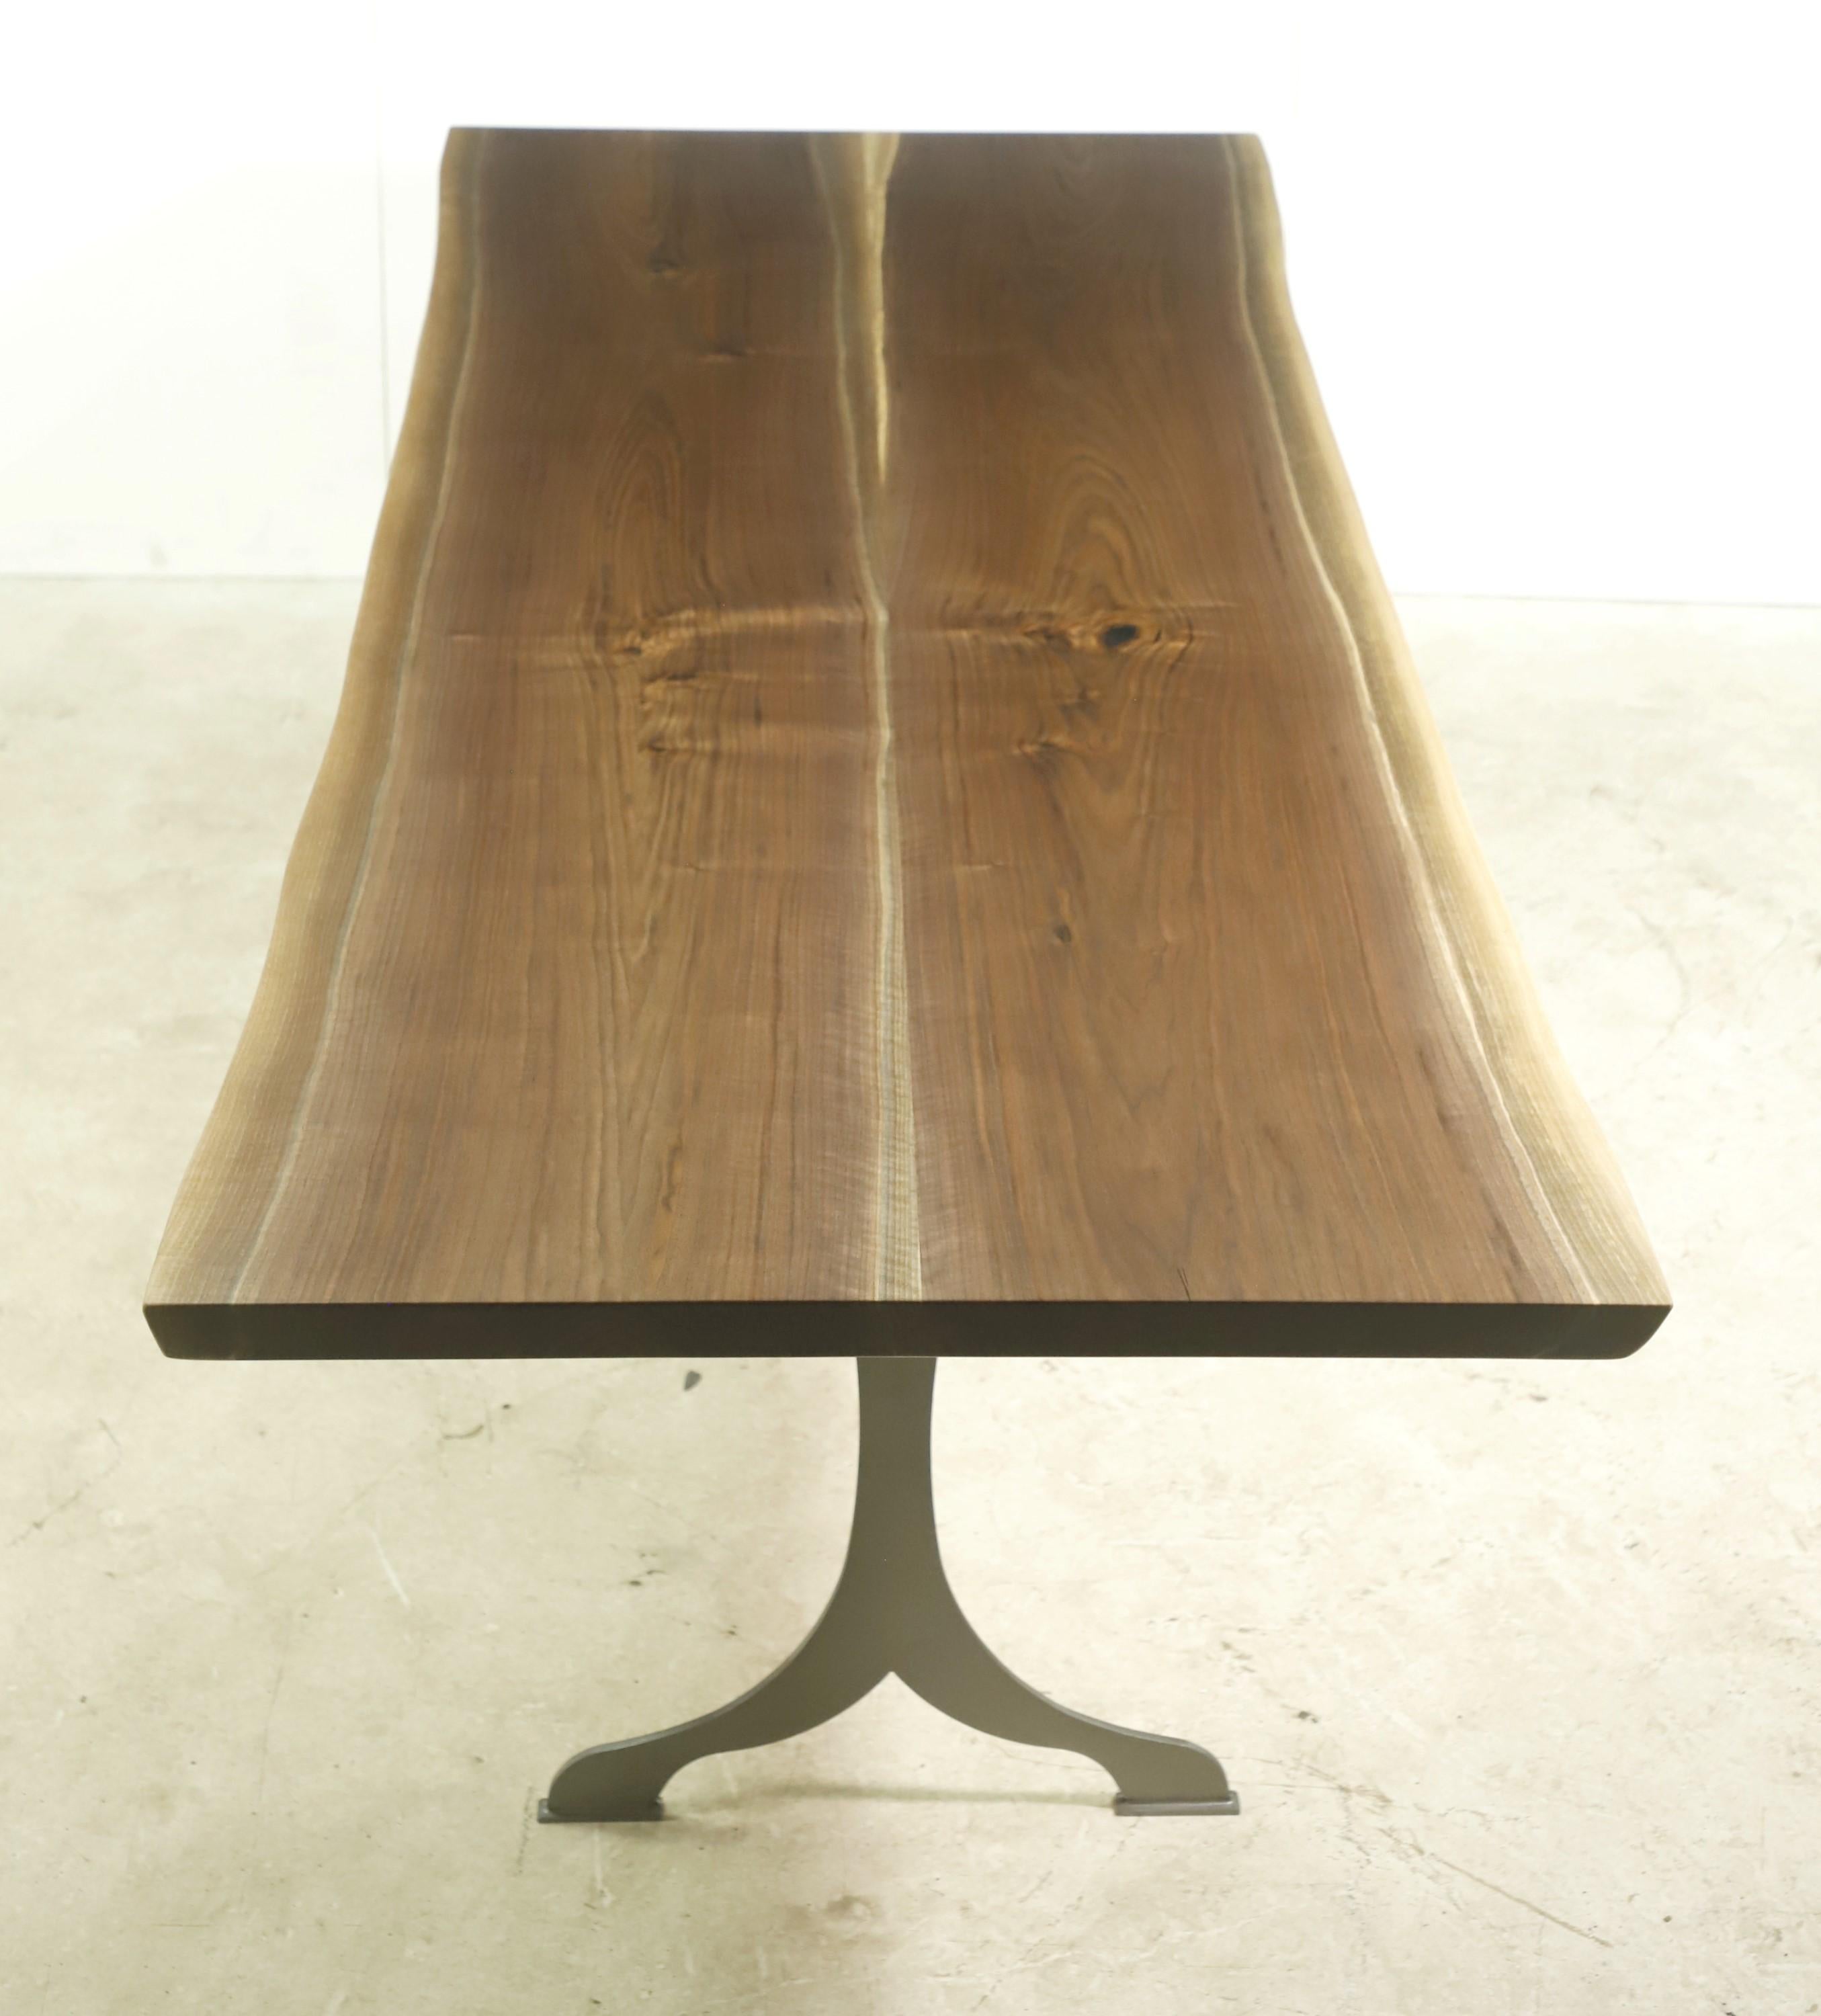 This live edge table features a two slab solid walnut top with a satin finish paired with brushed steel wishbone legs. This table is ready to ship. Please note, this item is located in our Scranton, PA location.